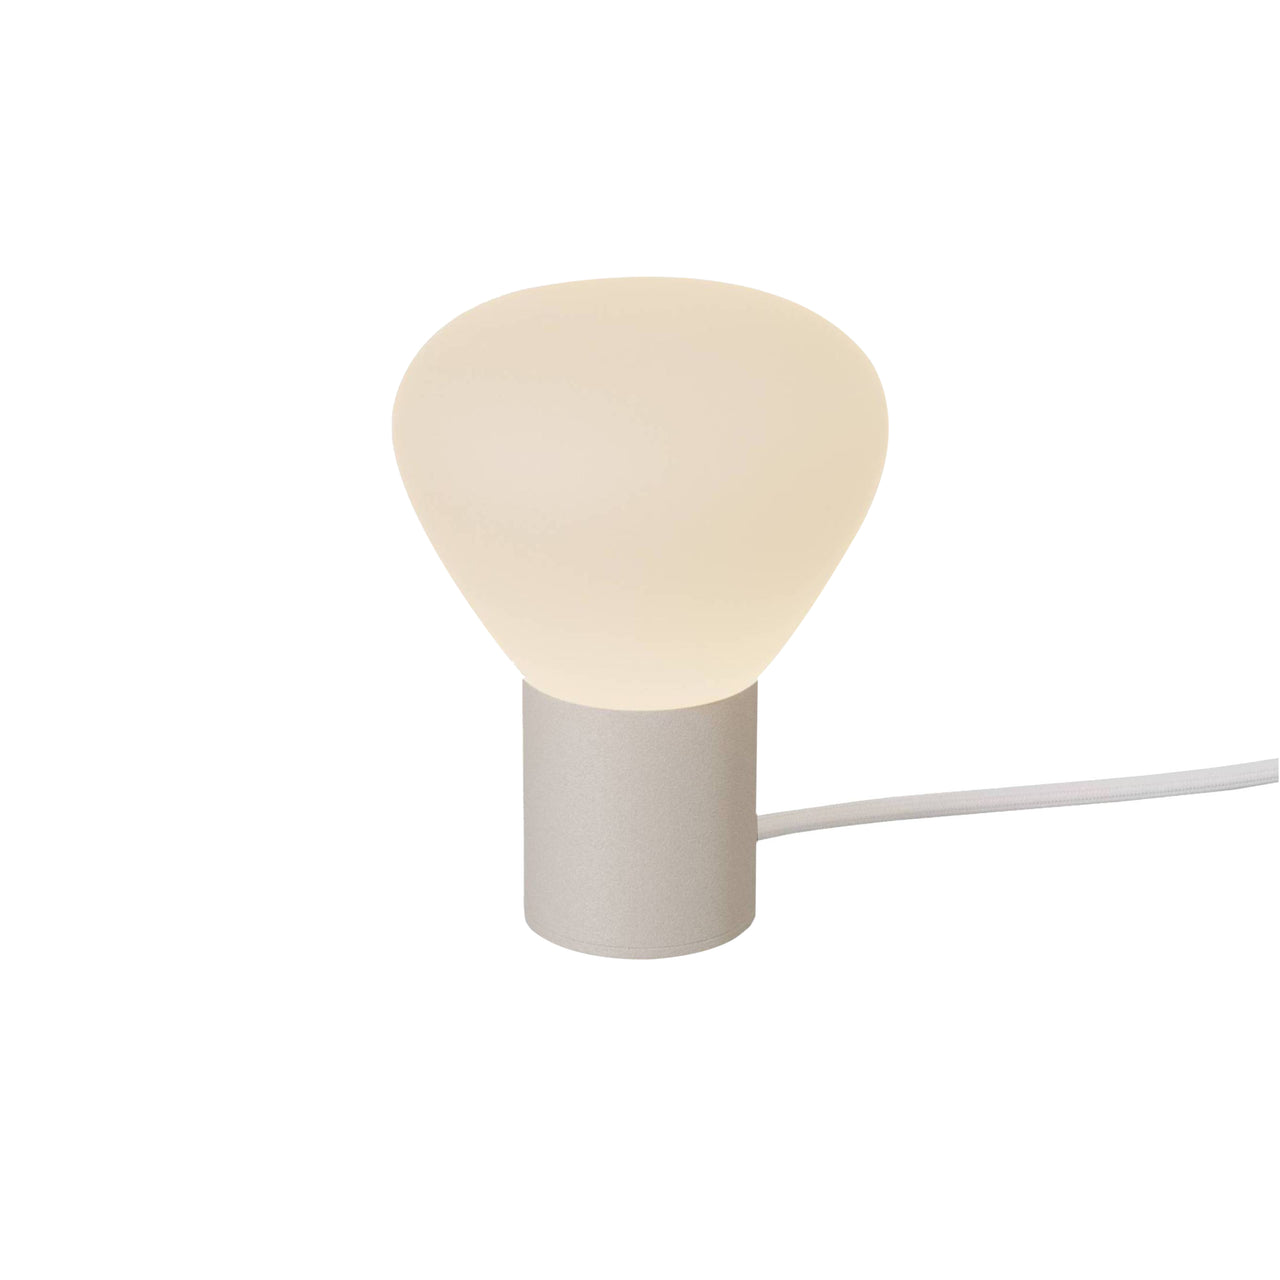 Parc 01 Table Lamp: Footswitch + Beige + White